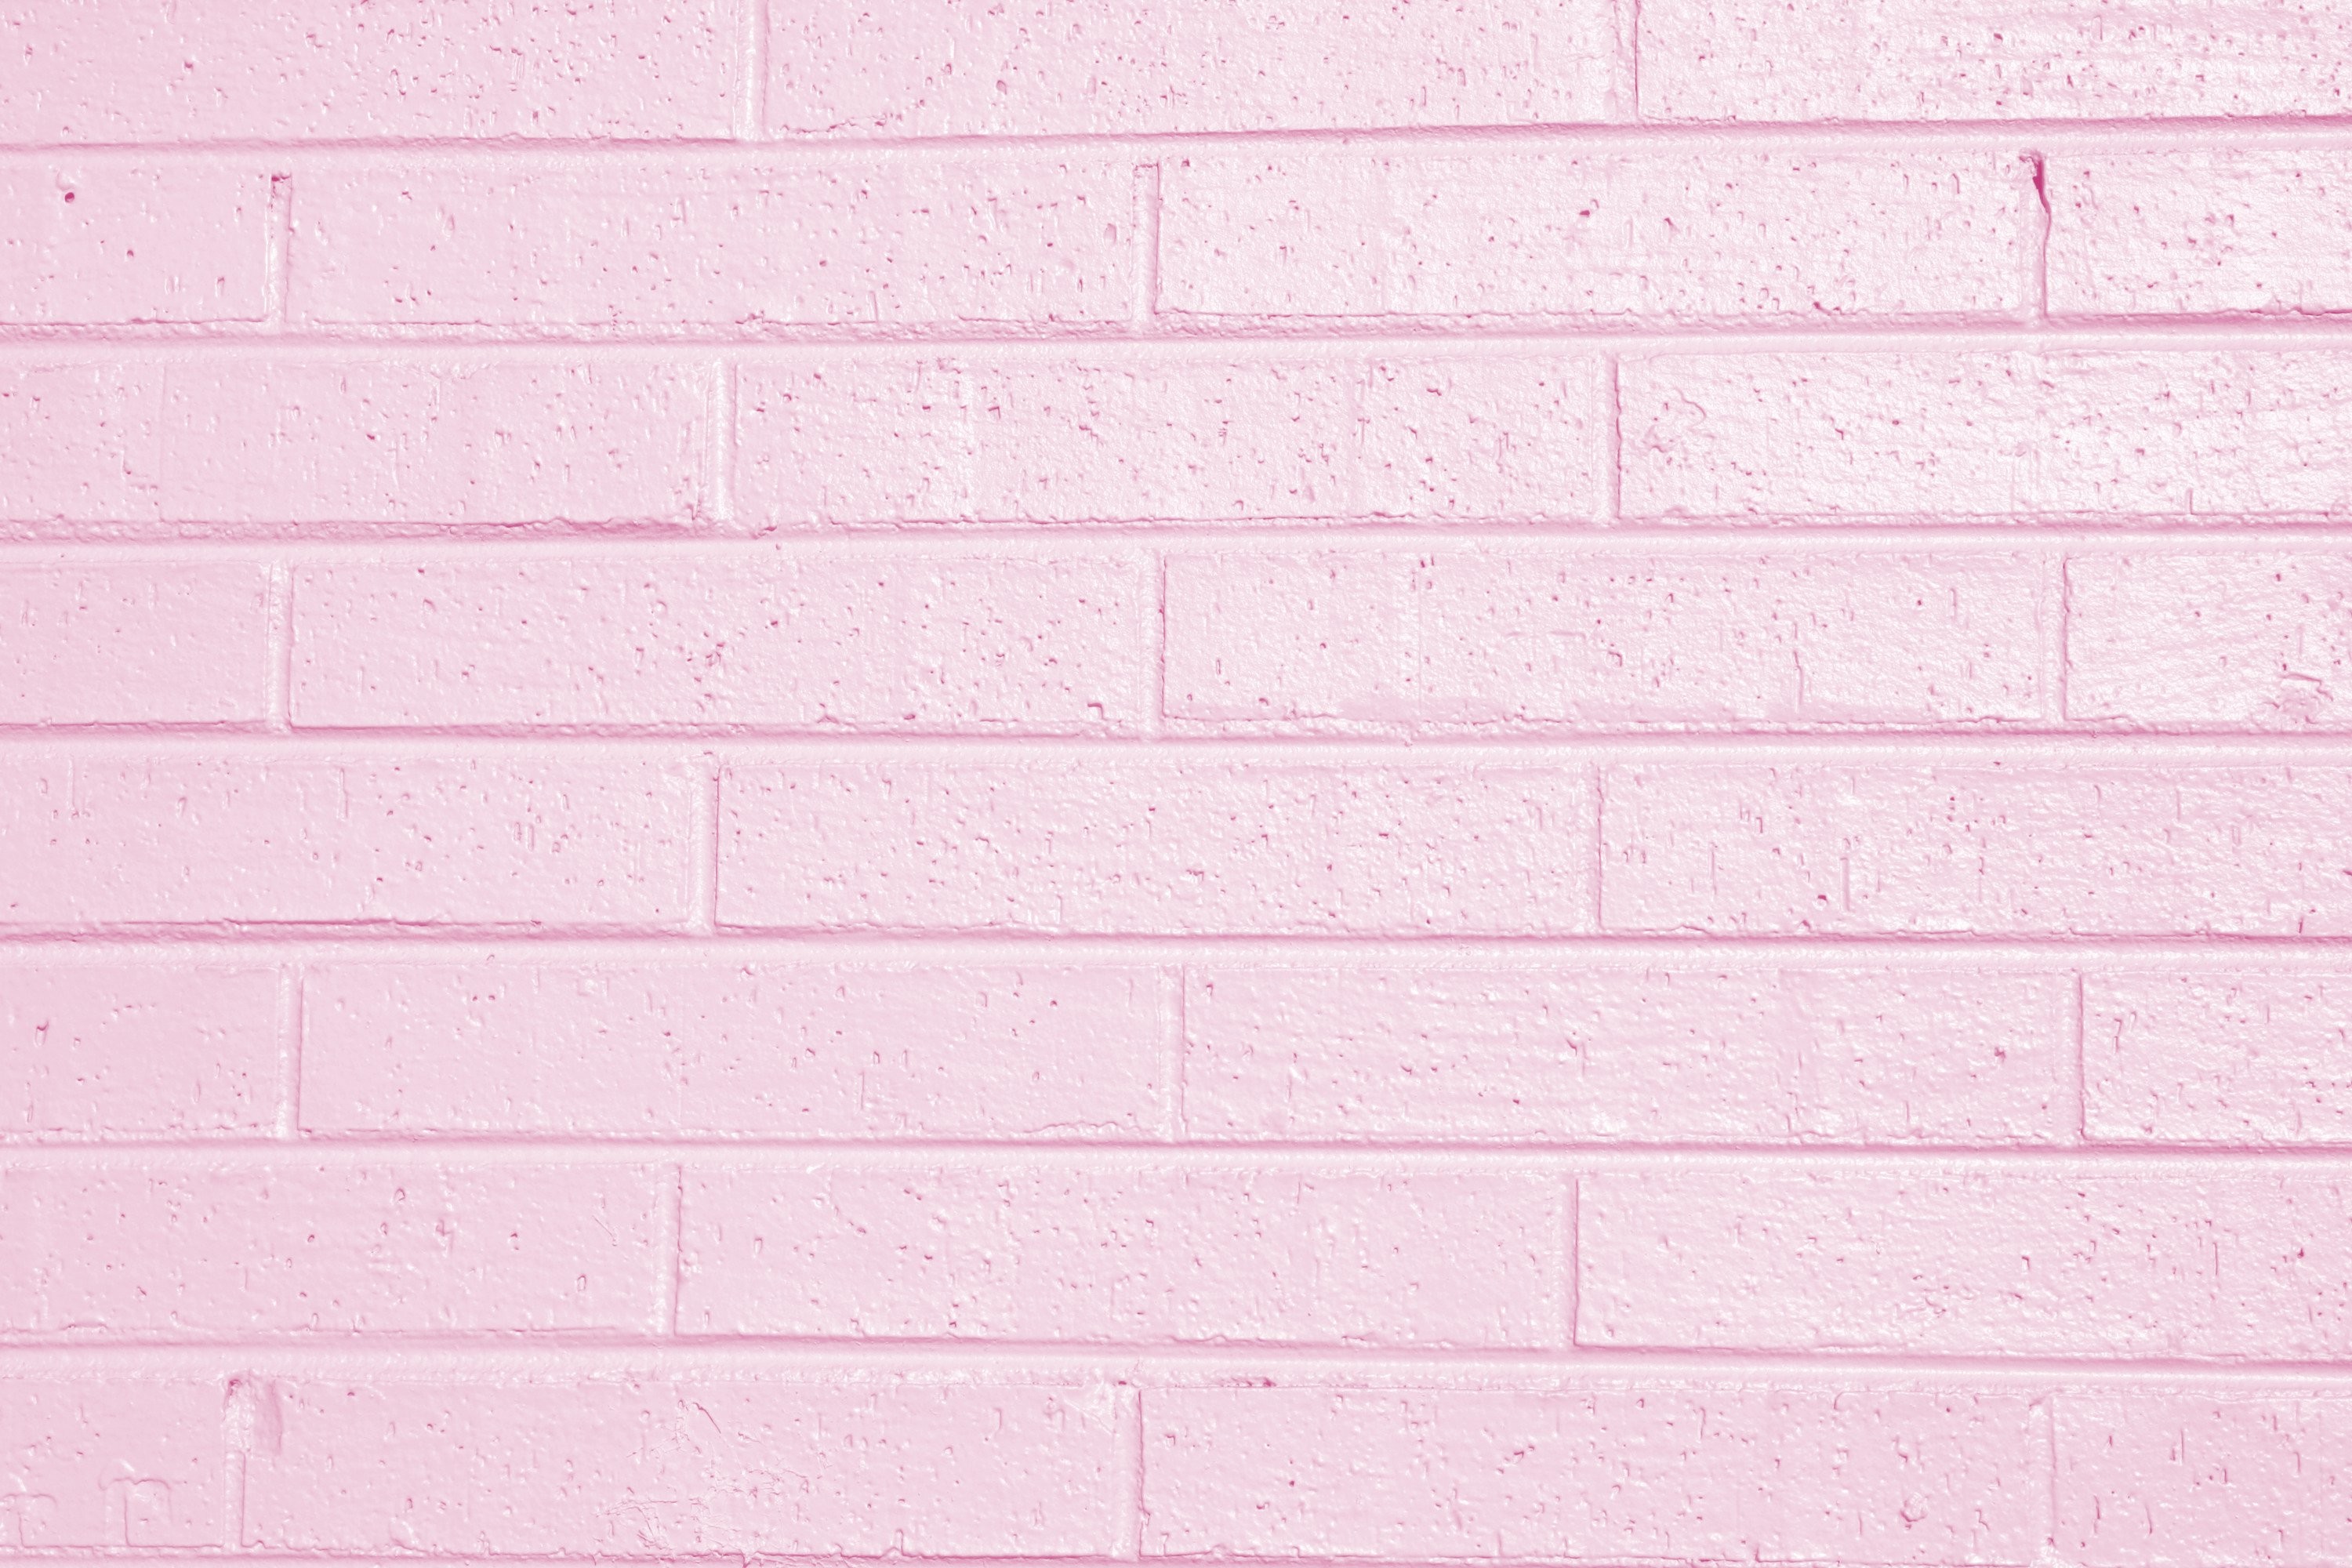 3000x2000 Free High Resolution Photo Of A Brick Wall Painted Light Pink. Great  Desktop Wallpaper Or